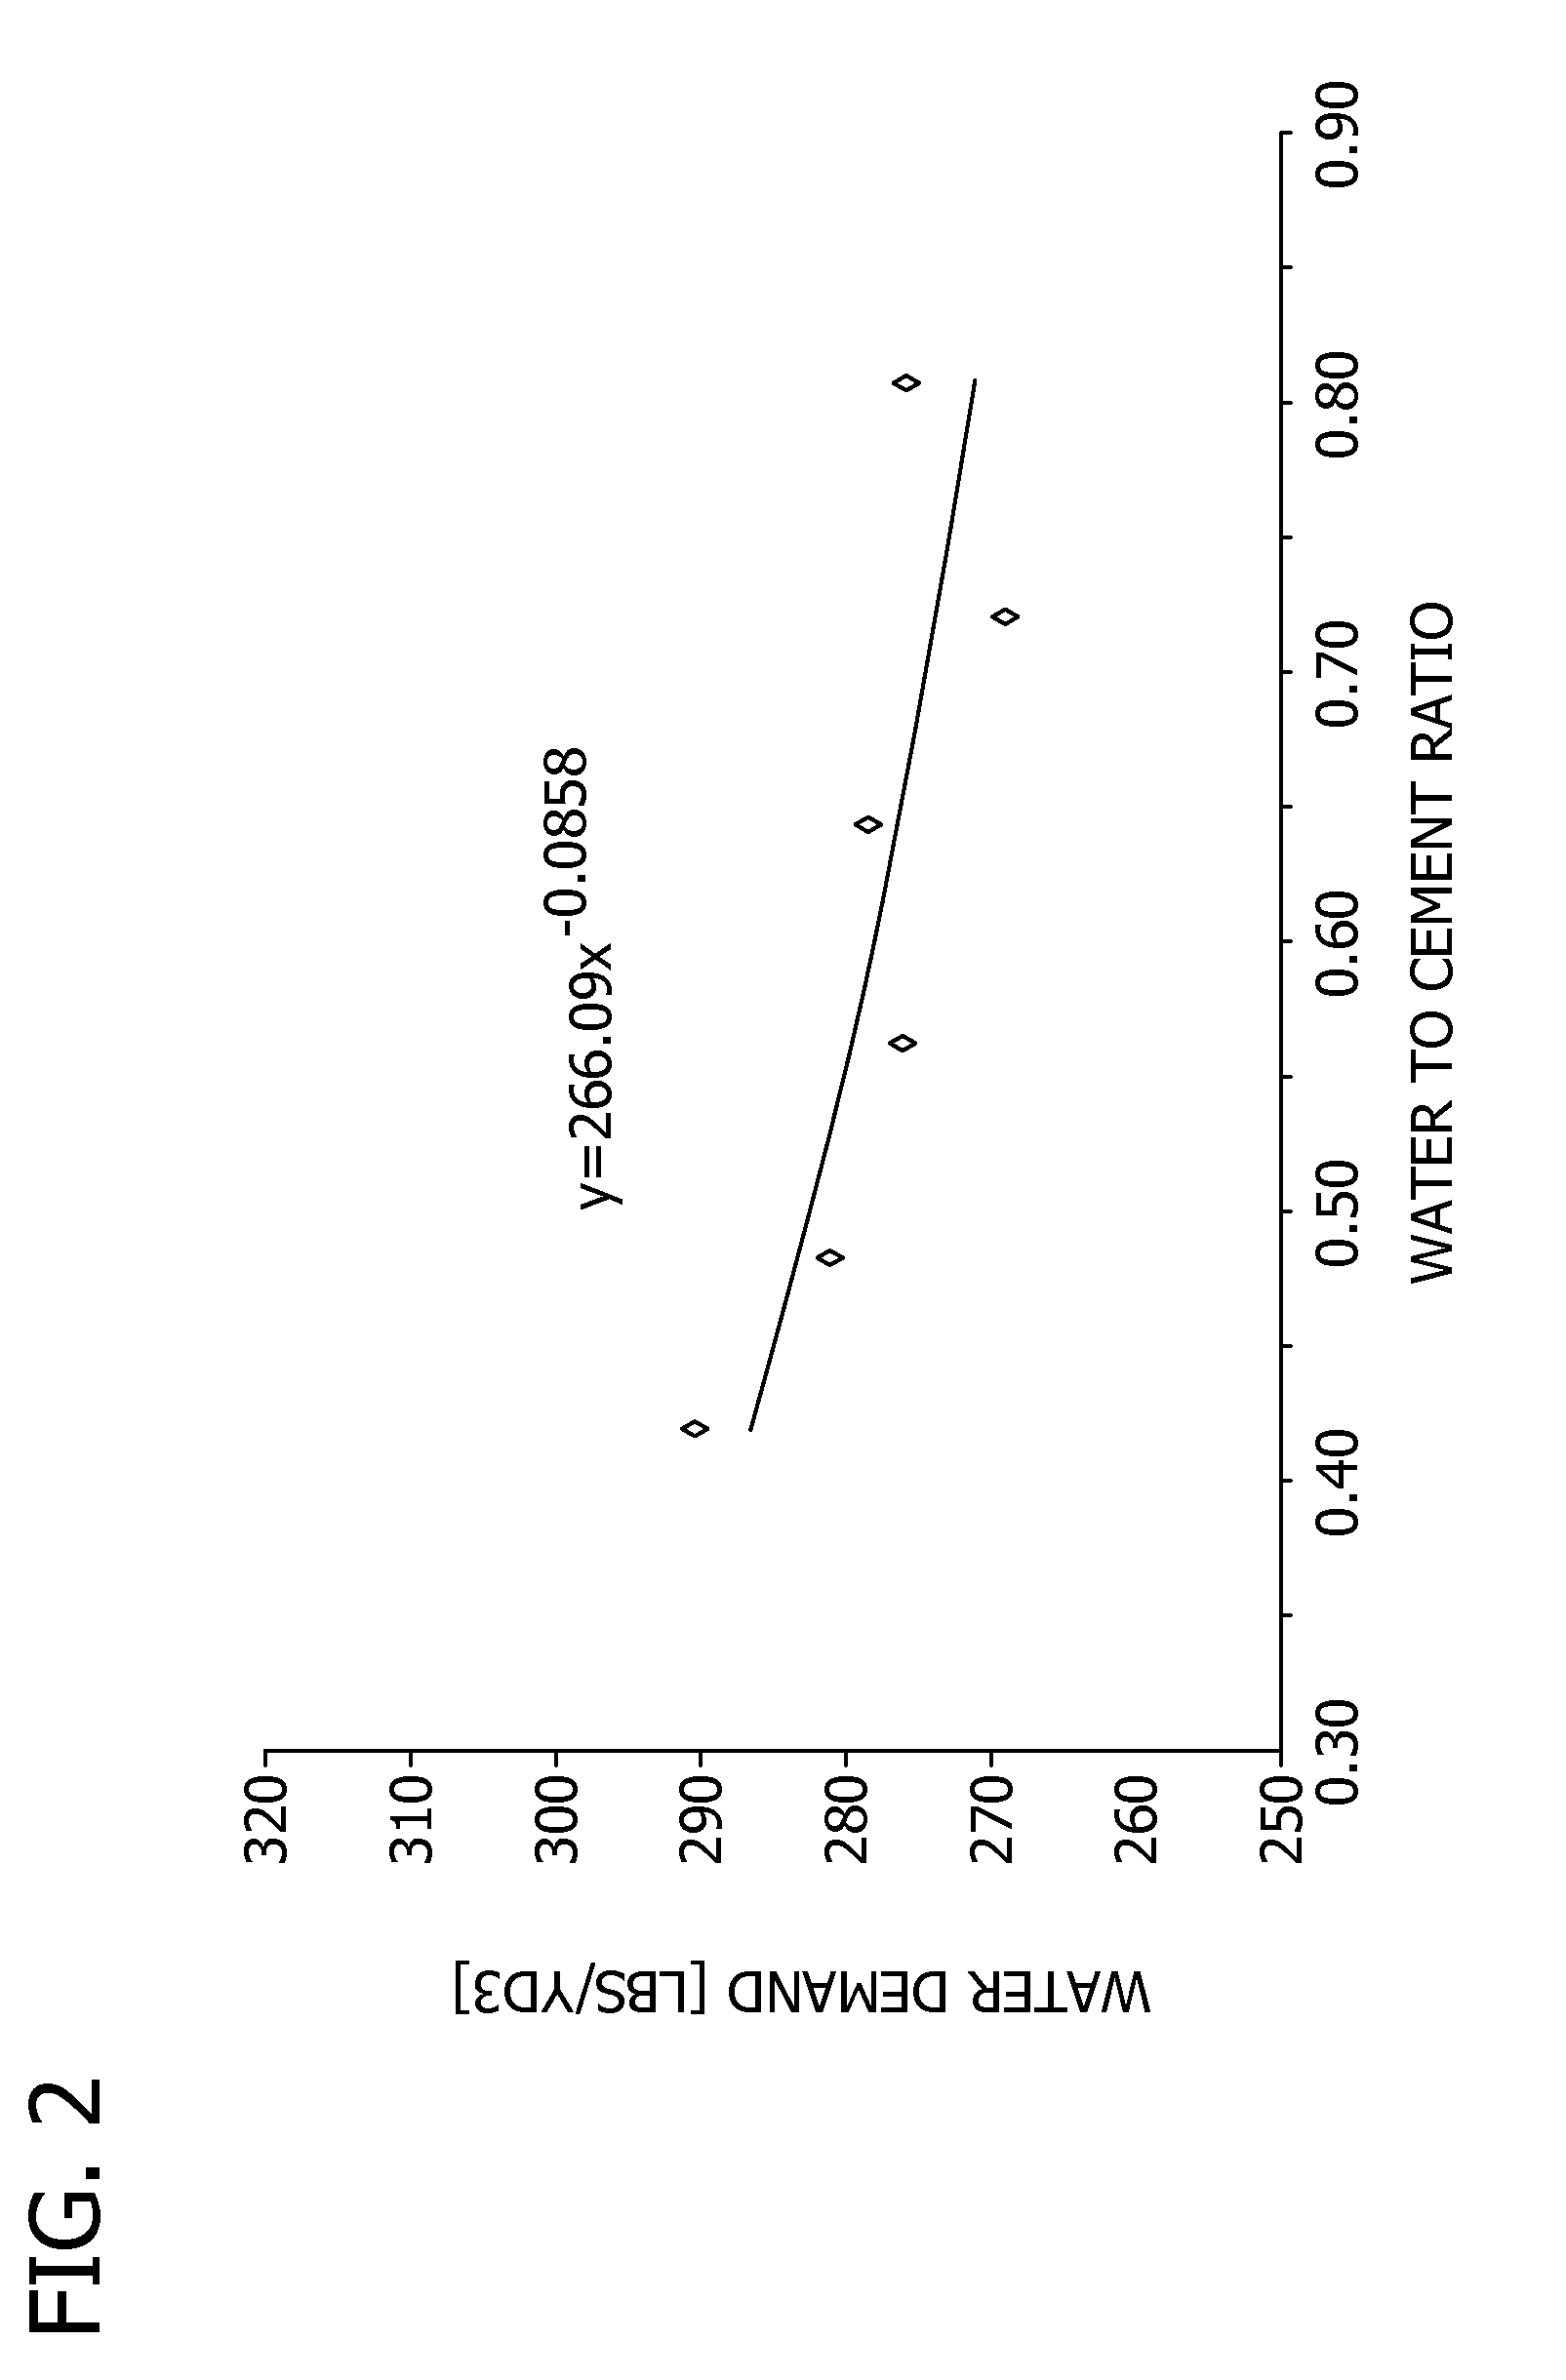 Method of designing a concrete compositions having desired slump with minimal water and plasticizer